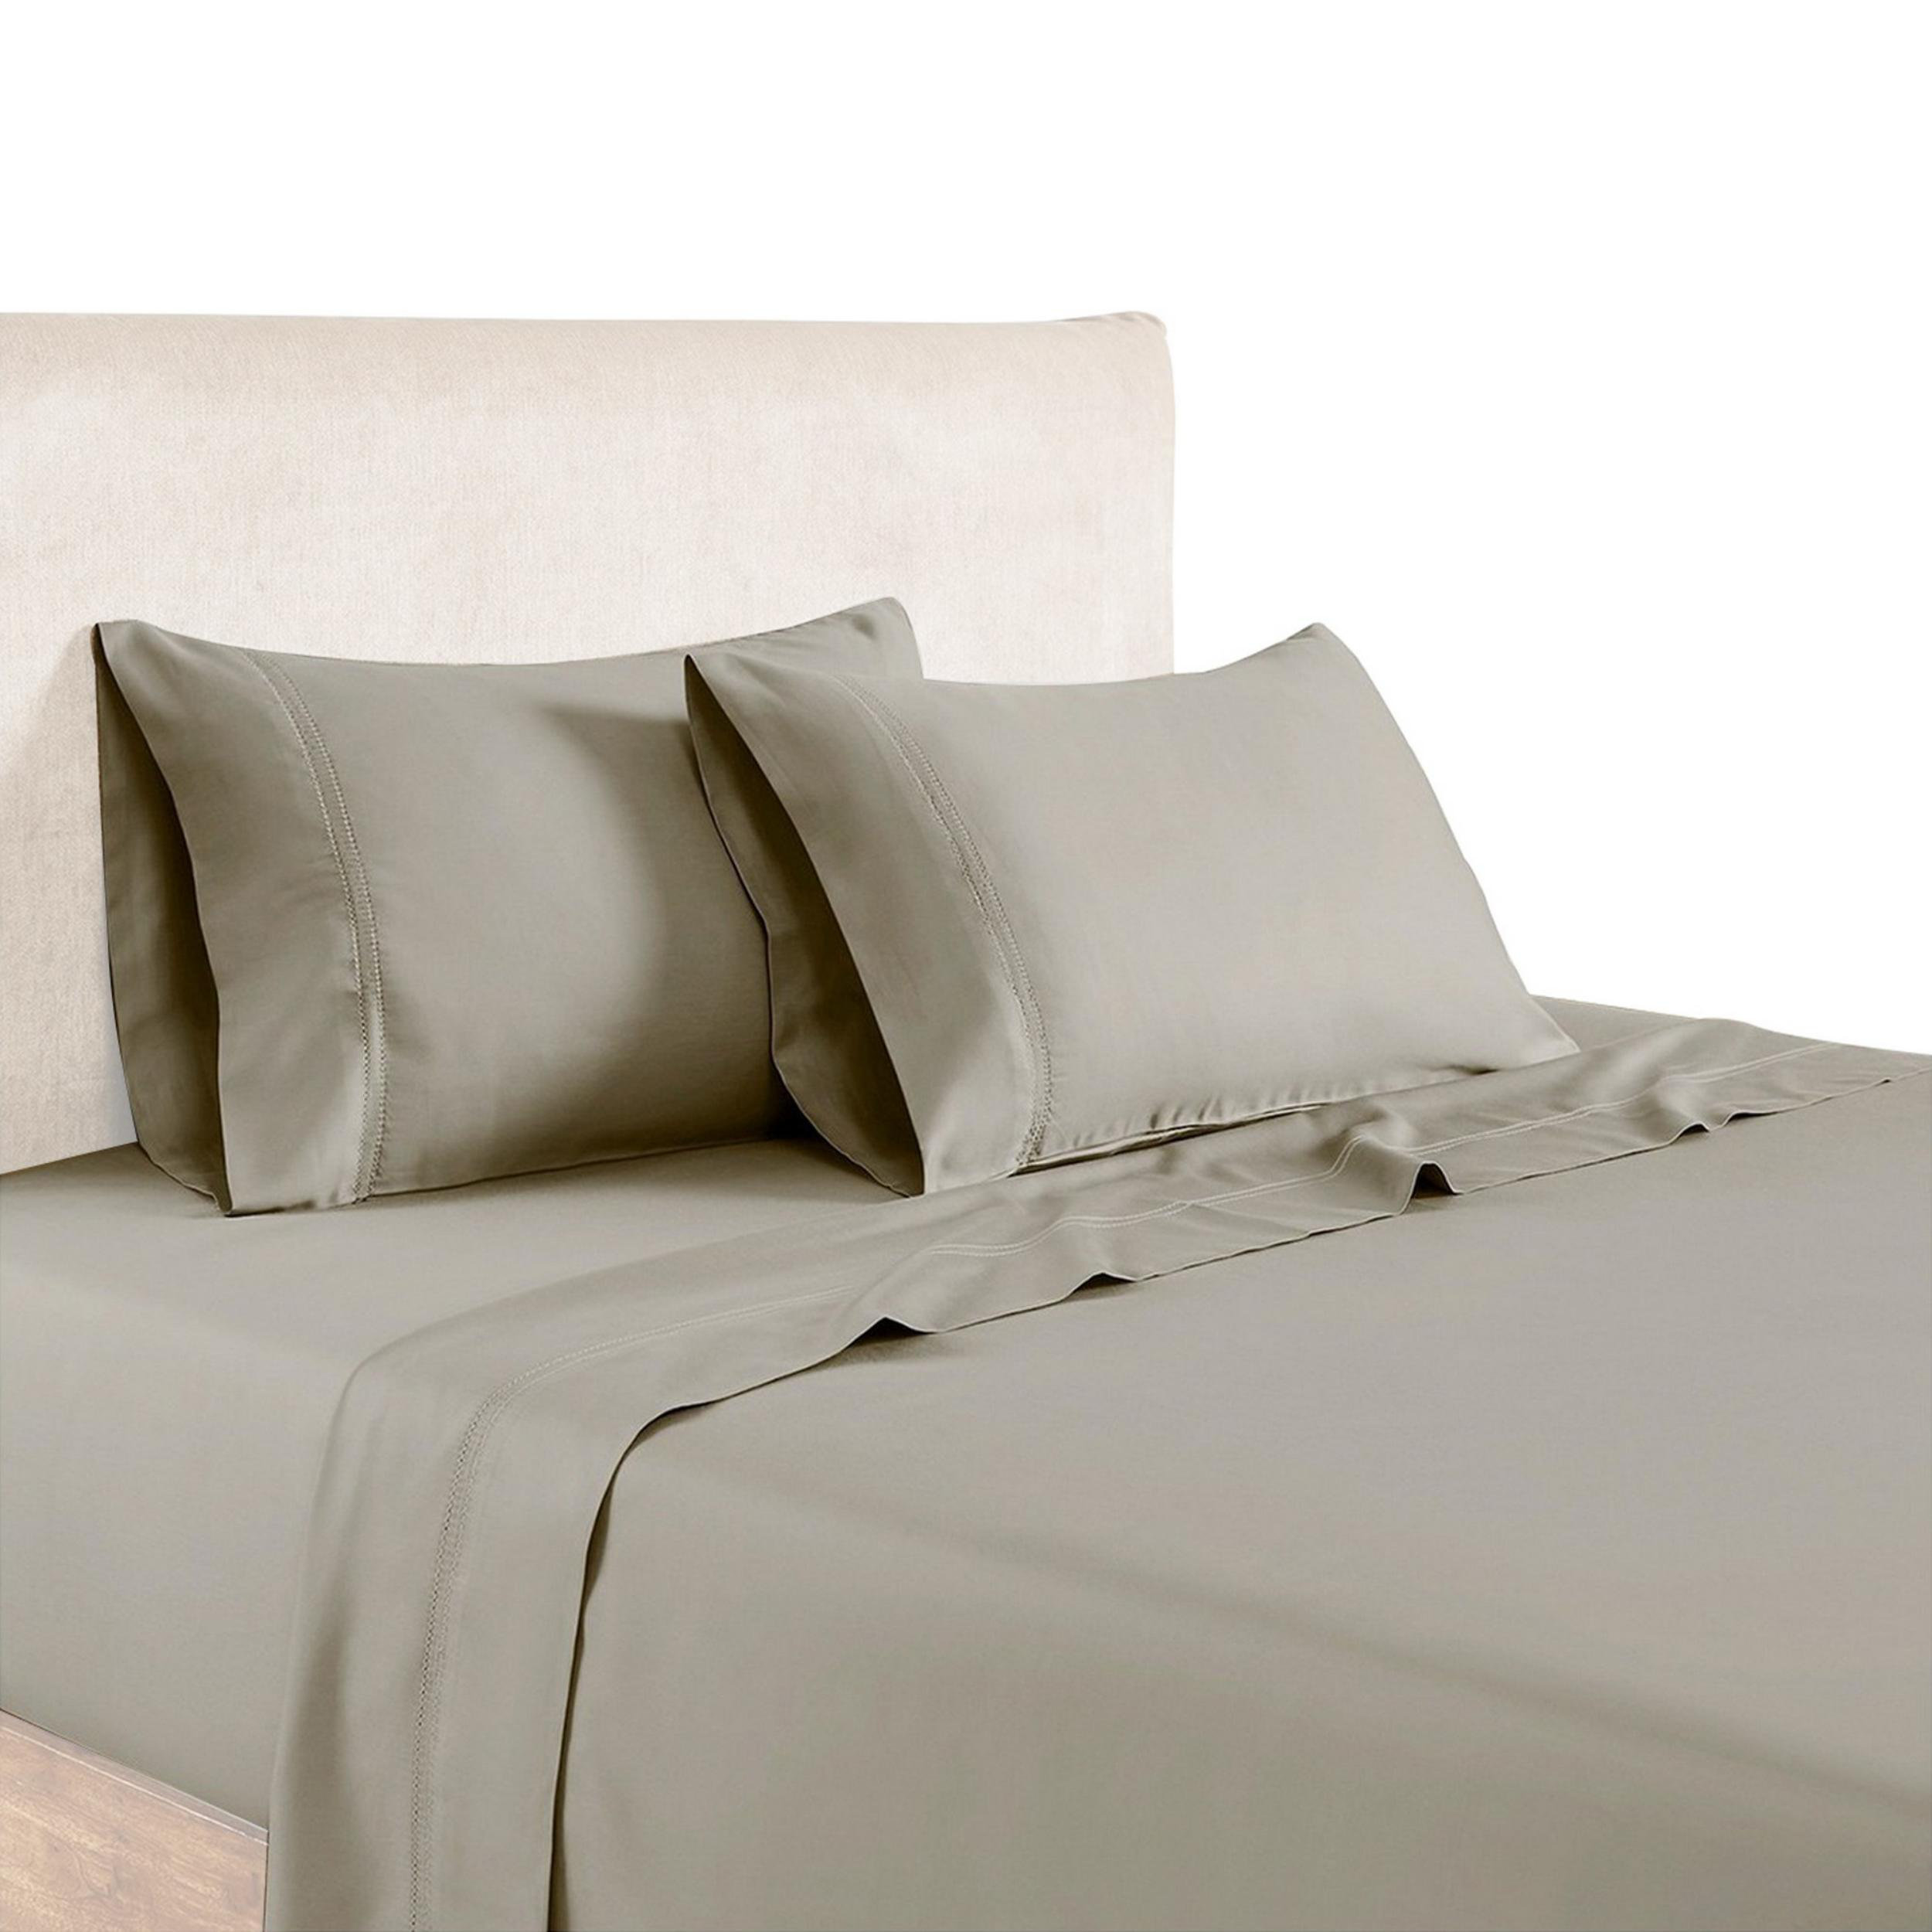 1200TC Egyptian Cotton White Solid DuvetCover/Sheet Set/Flat/Fitted/Pillow Queen